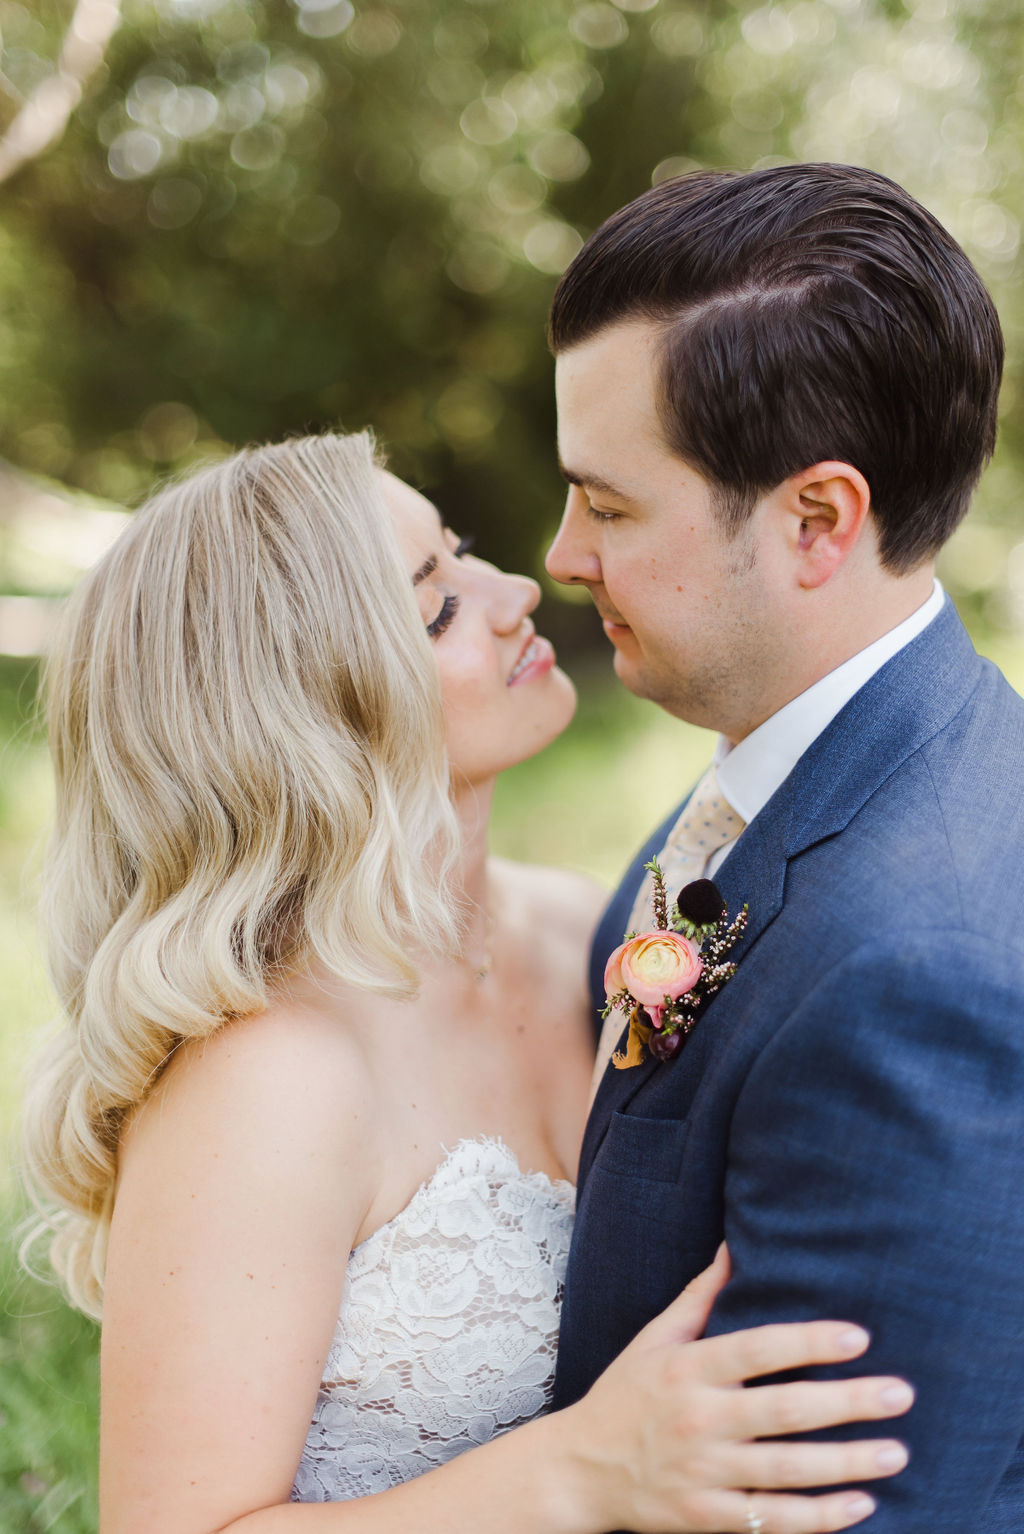 Calgary bride and groom share an intimate moment on their wedding day